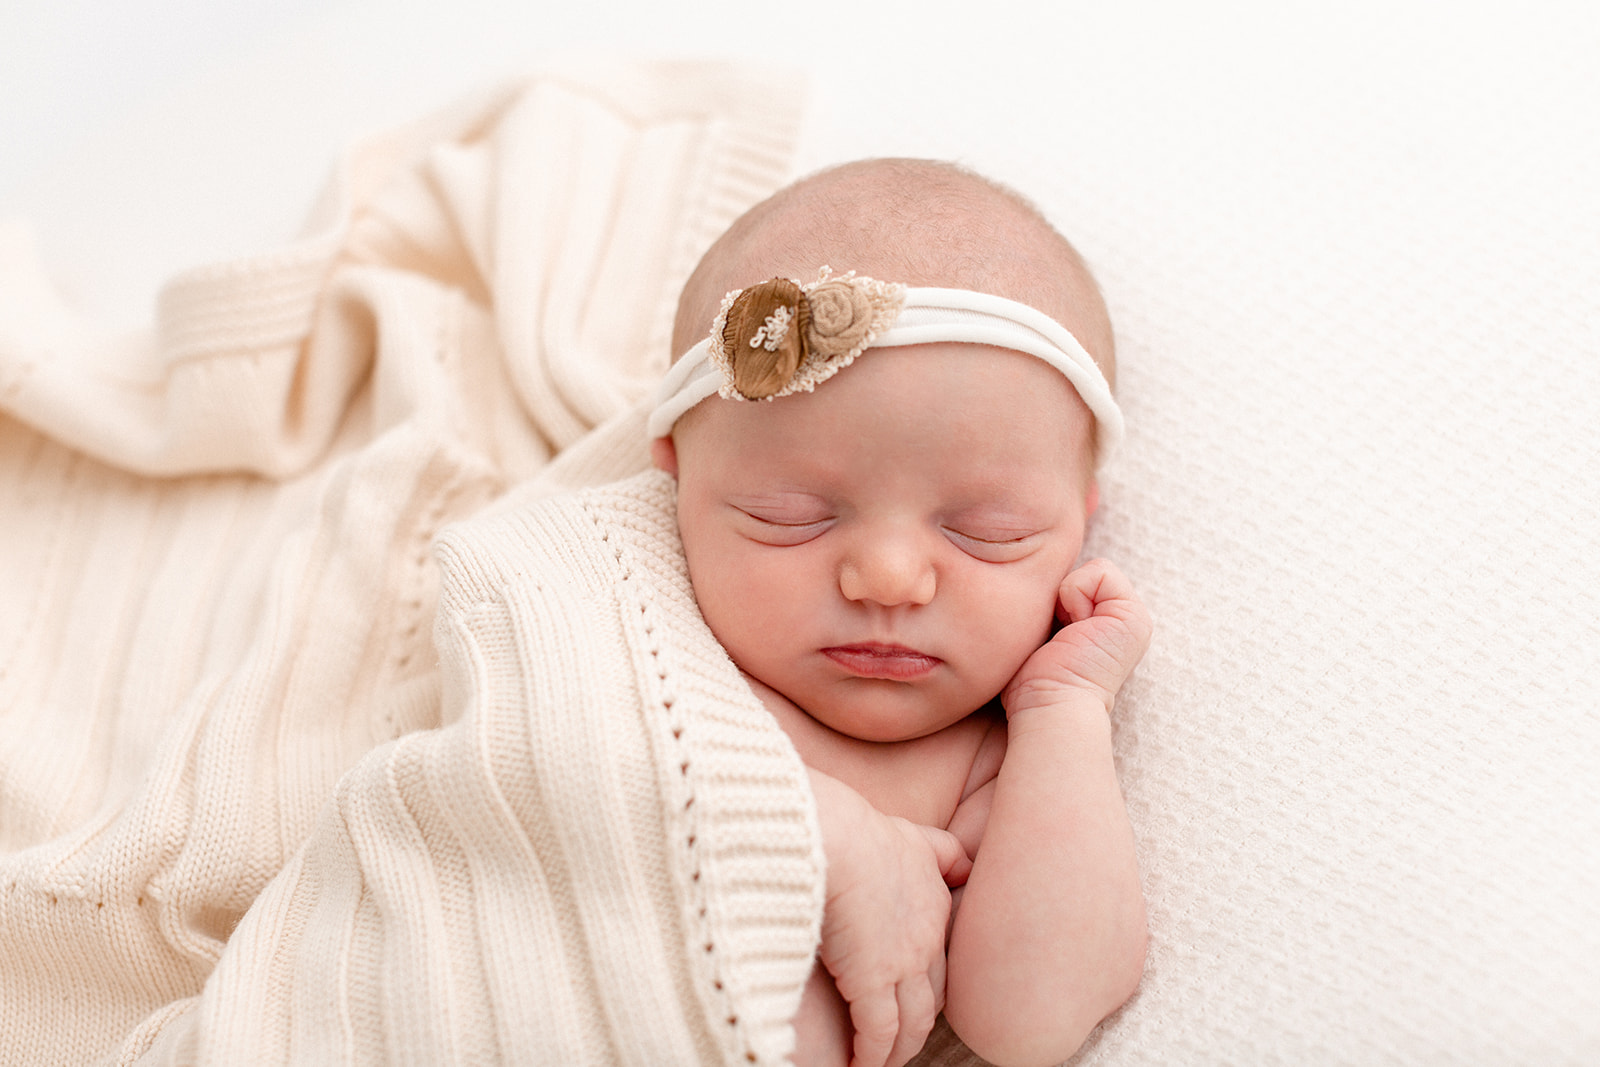 A newborn sleeps on a white bed under a knit blanket after visiting Posh Baby Portland